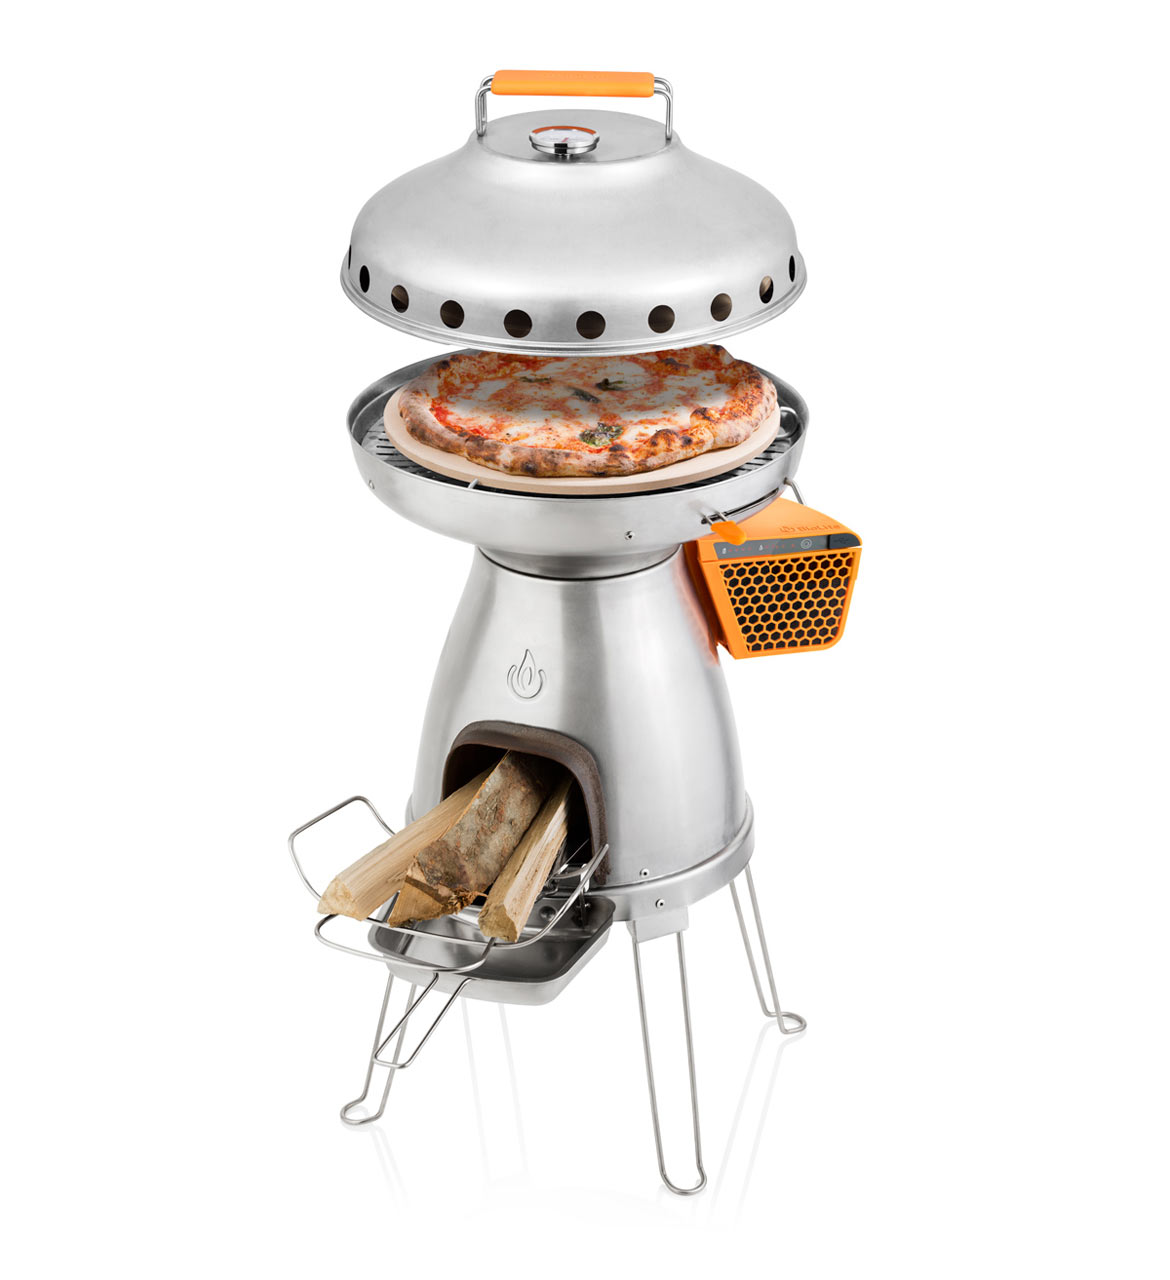 BaseCamp stove and PizzaDome addition by BioLite (via www.digsdigs.com)